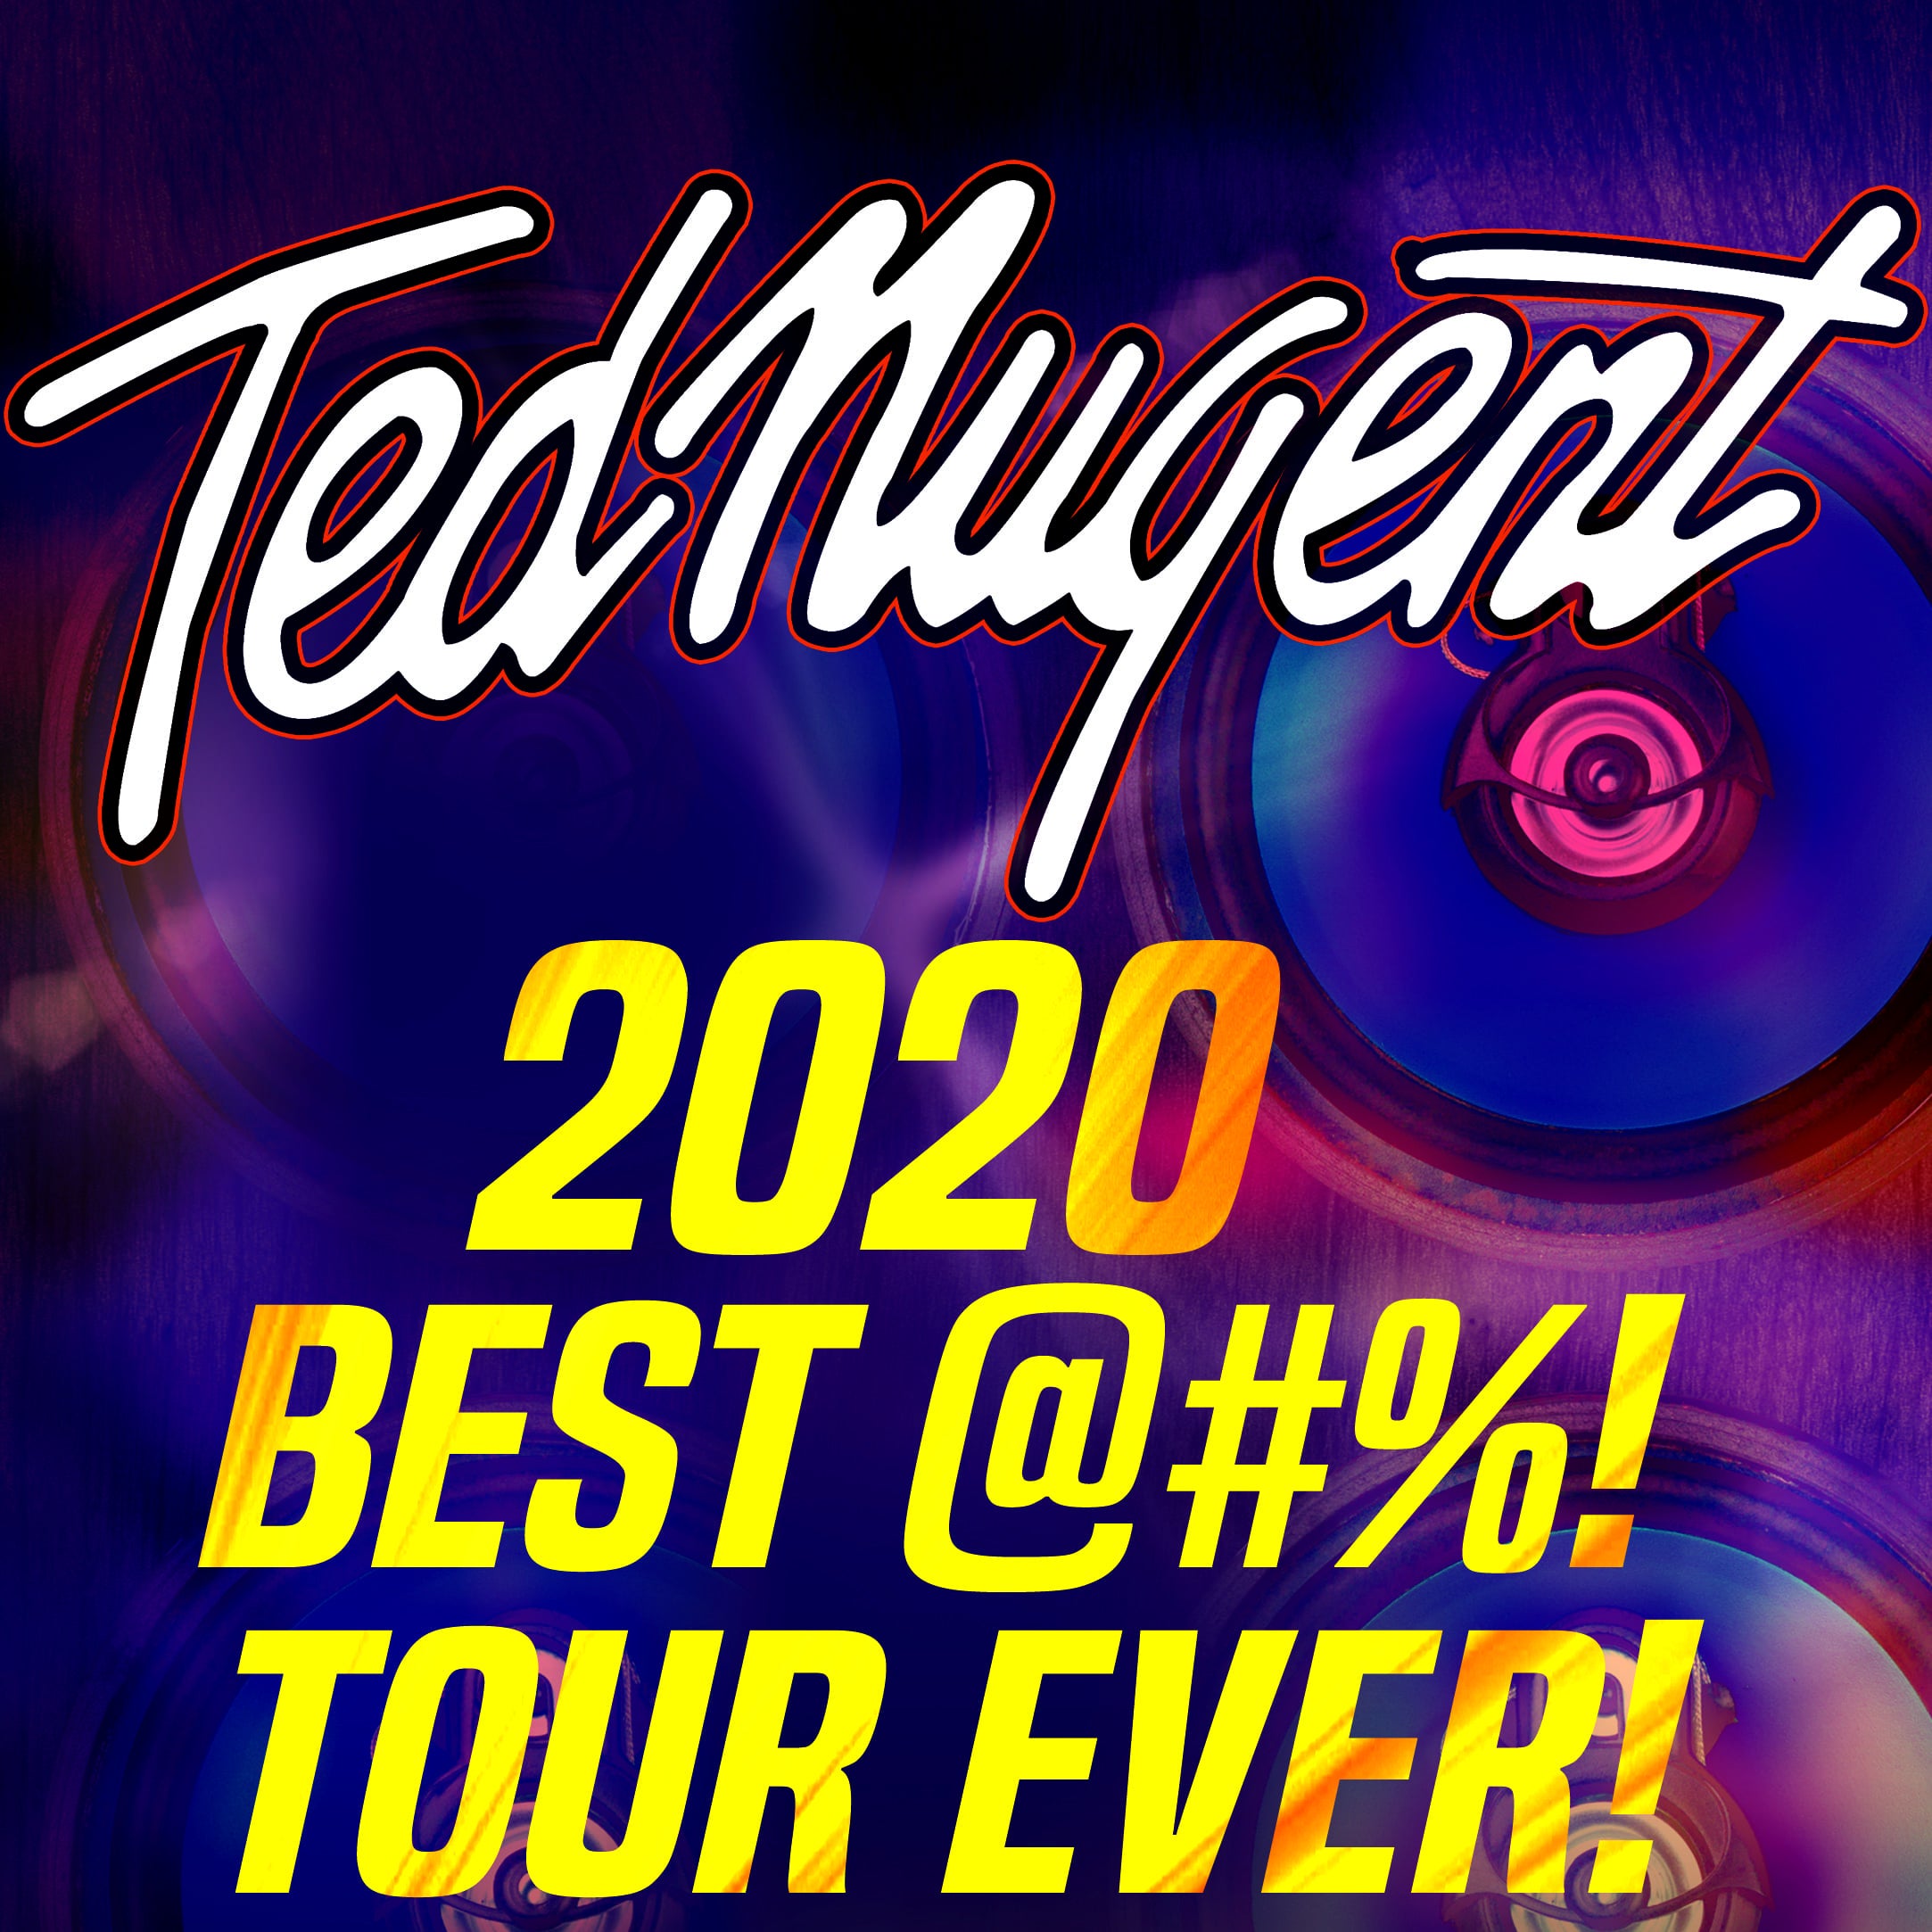 More Info for JUST ANNOUNCED: TED NUGENT BRINGS “BEST @#%! TOUR EVER!” TO DTE ENERGY MUSIC THEATRE SATURDAY, AUGUST 15